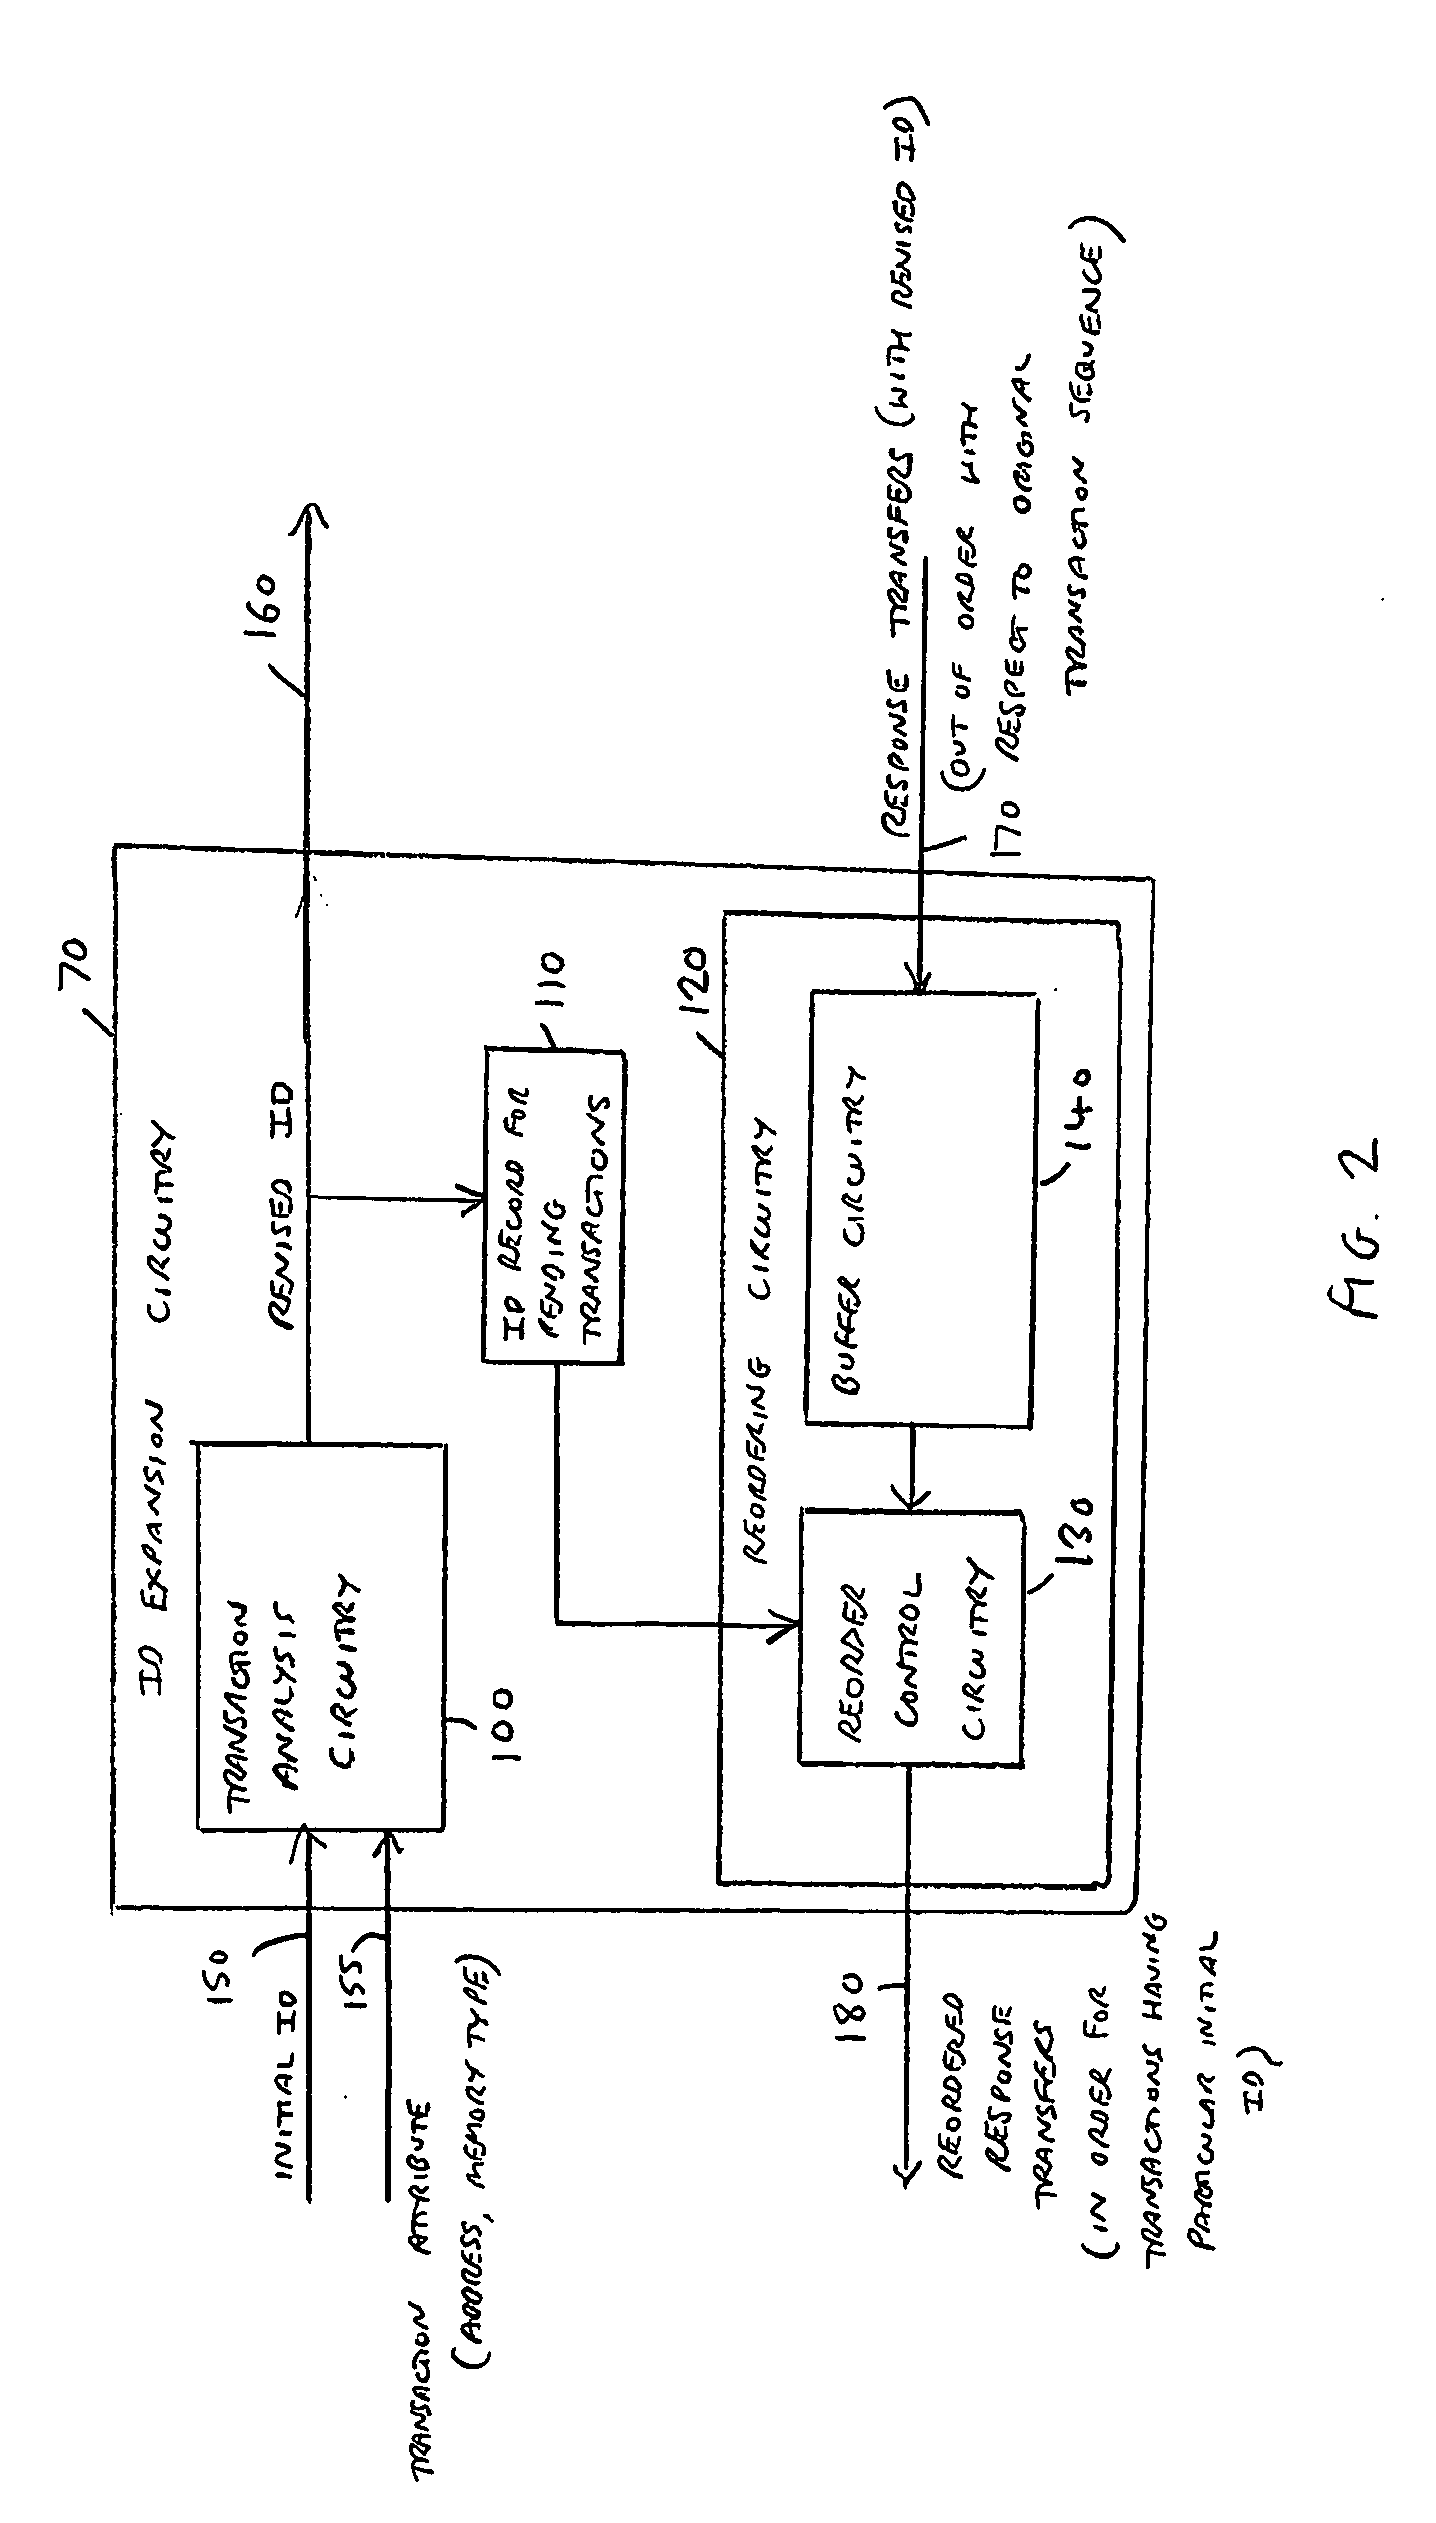 Transaction indentifier expansion circuitry and method of operation of such circuitry